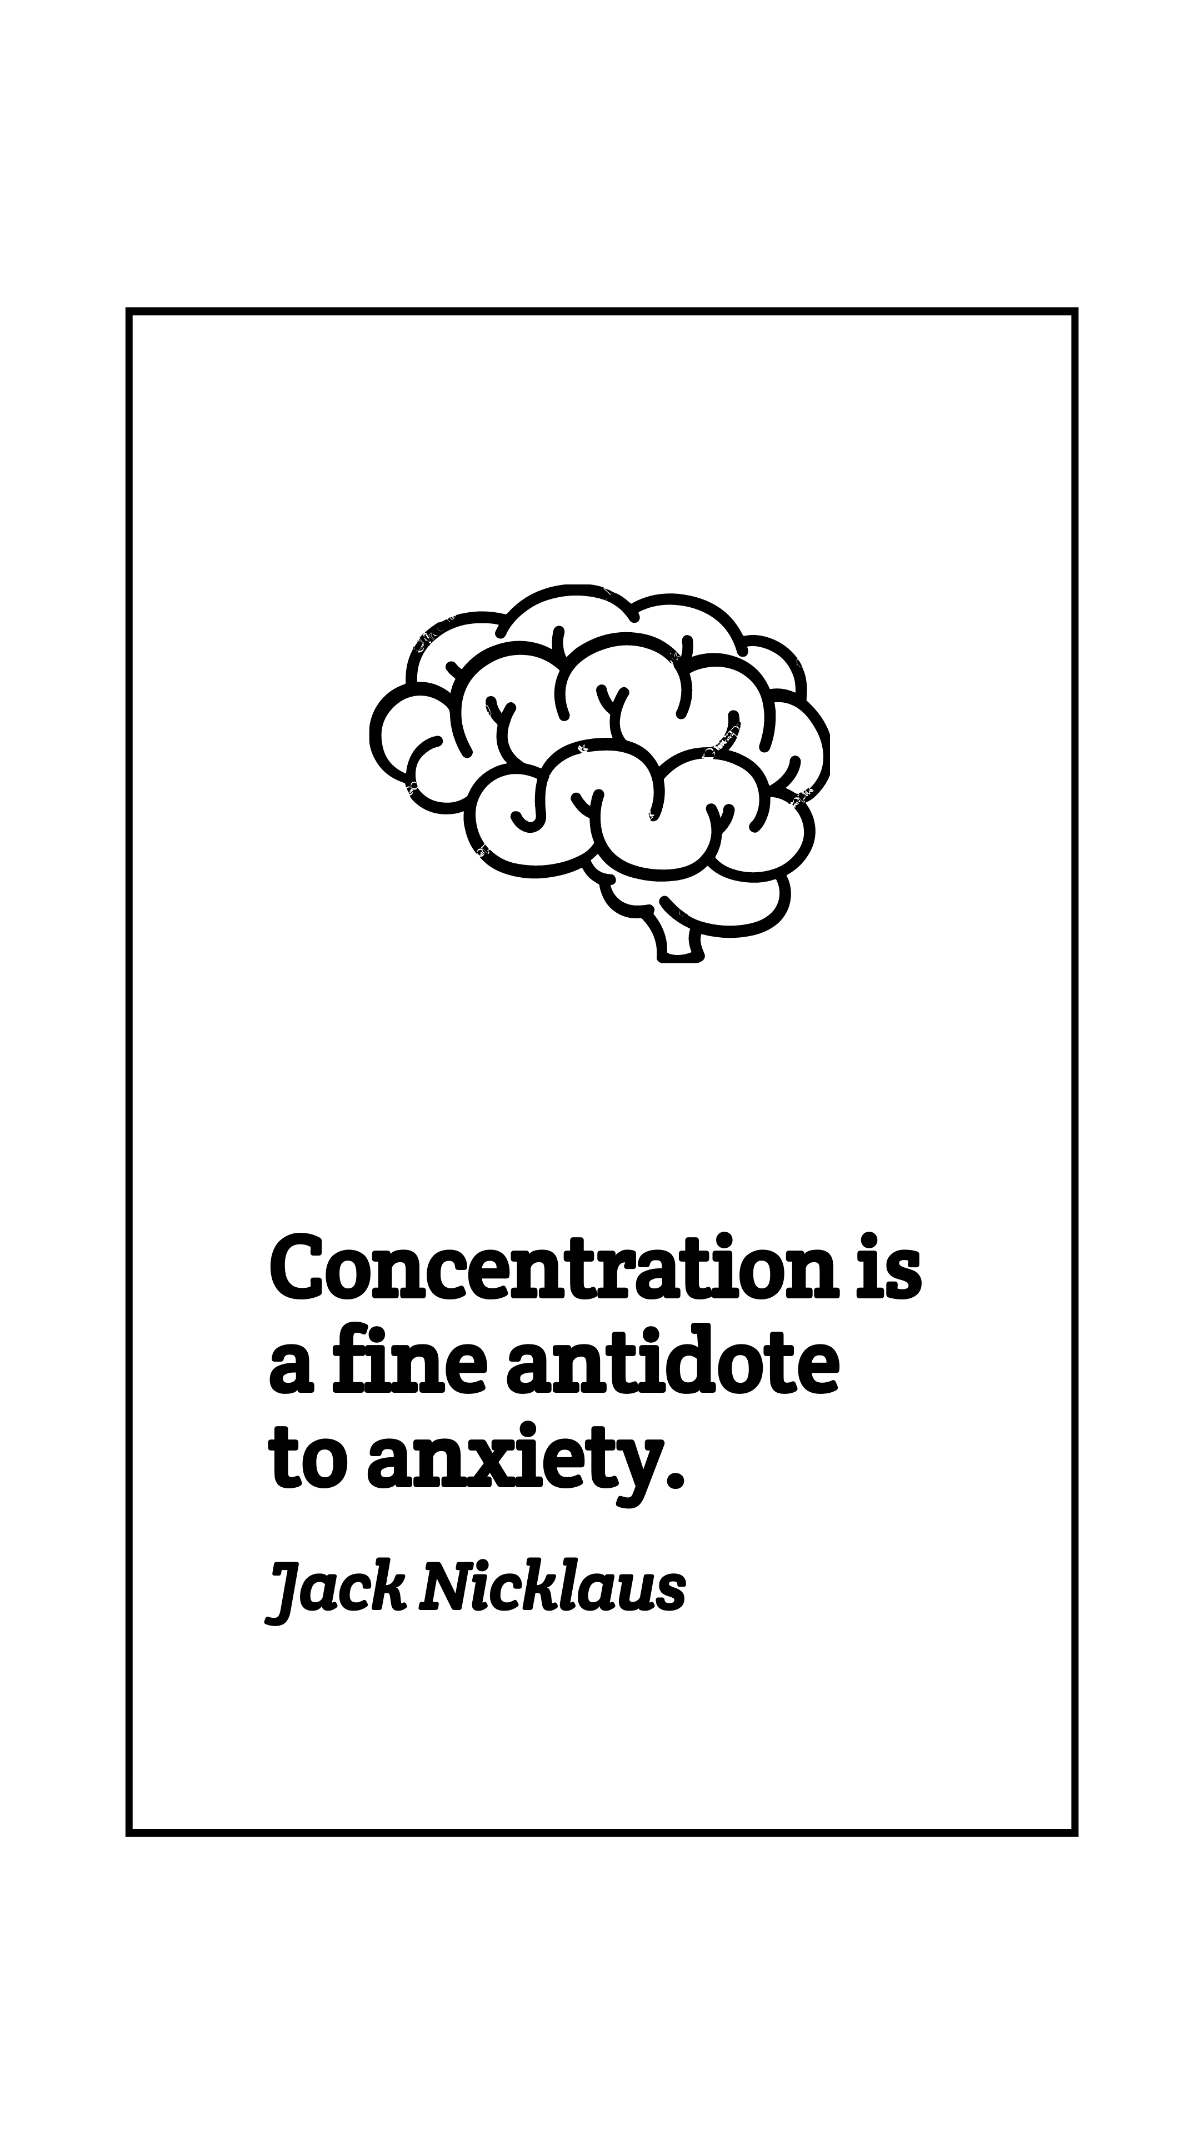 Jack Nicklaus - Concentration is a fine antidote to anxiety. Template